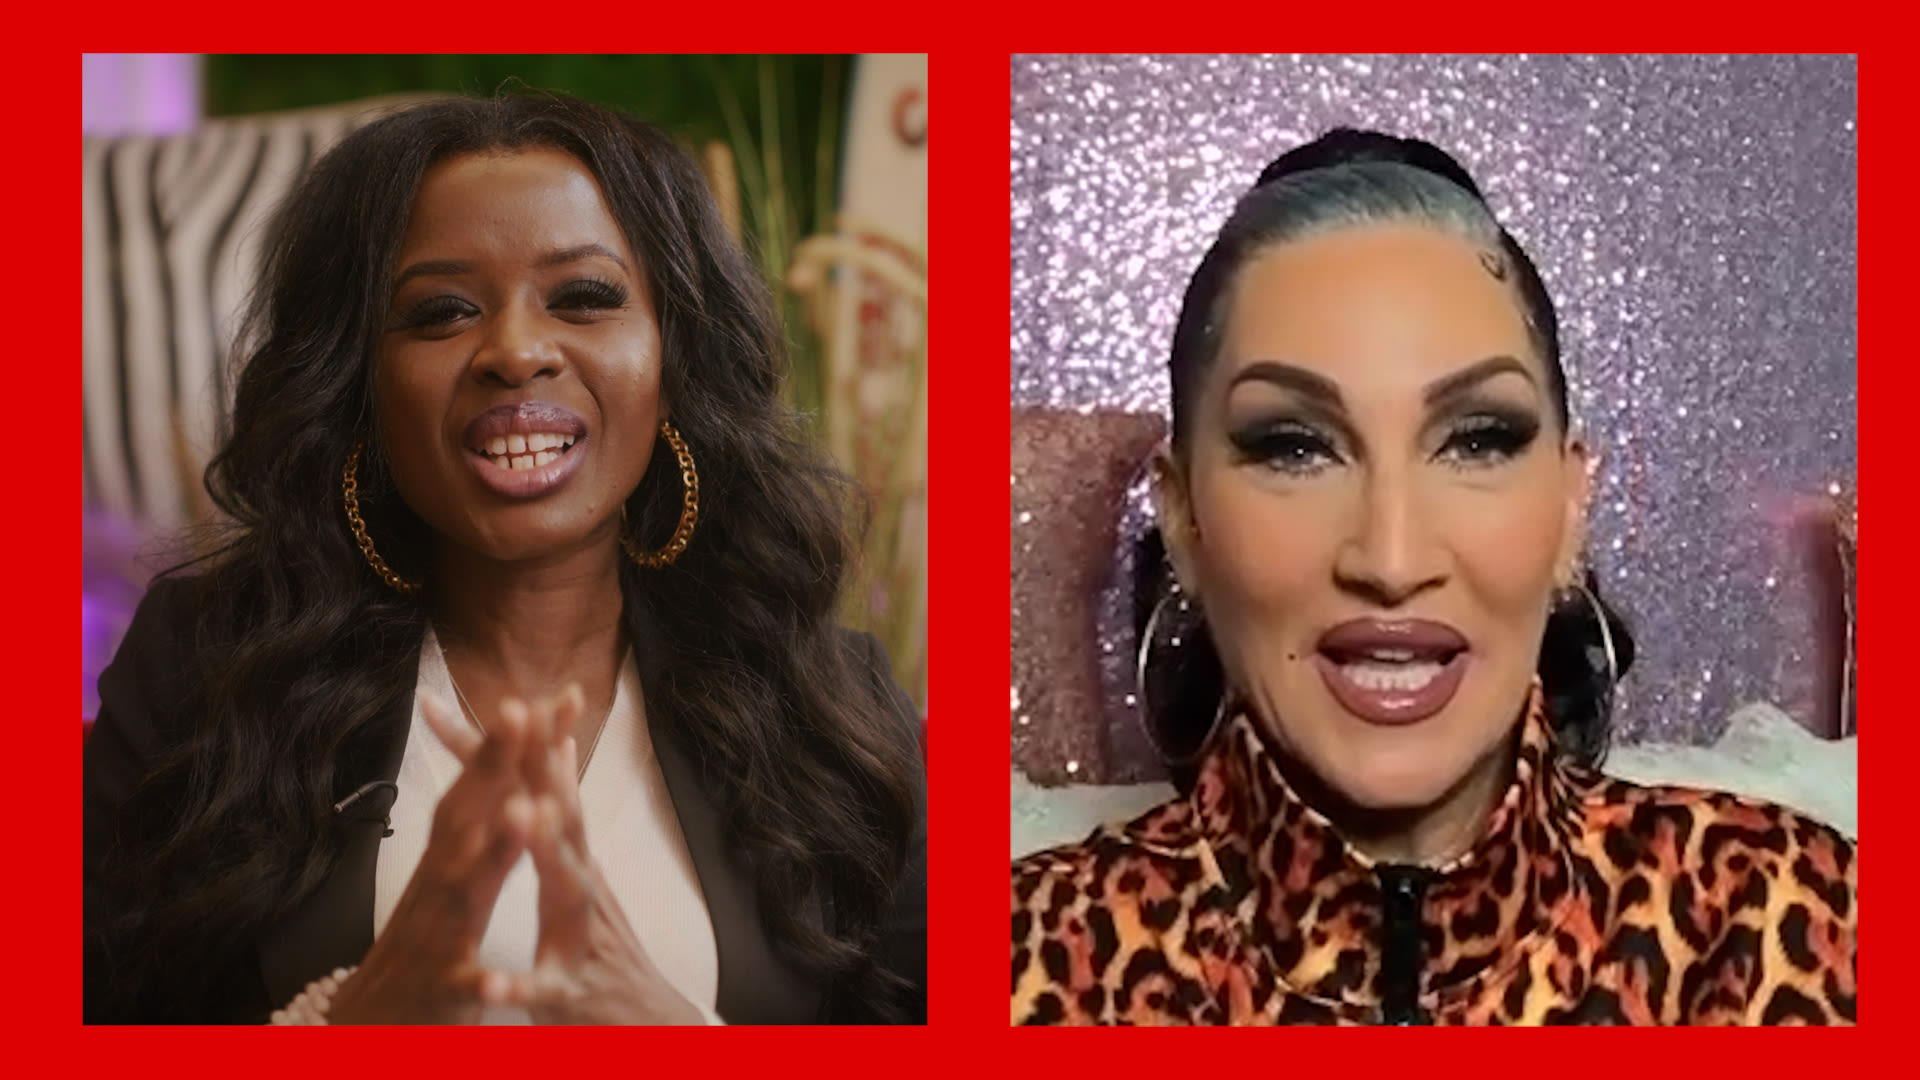 Michelle Visage and June Sarpong at Virgin's virtual Together We Can event